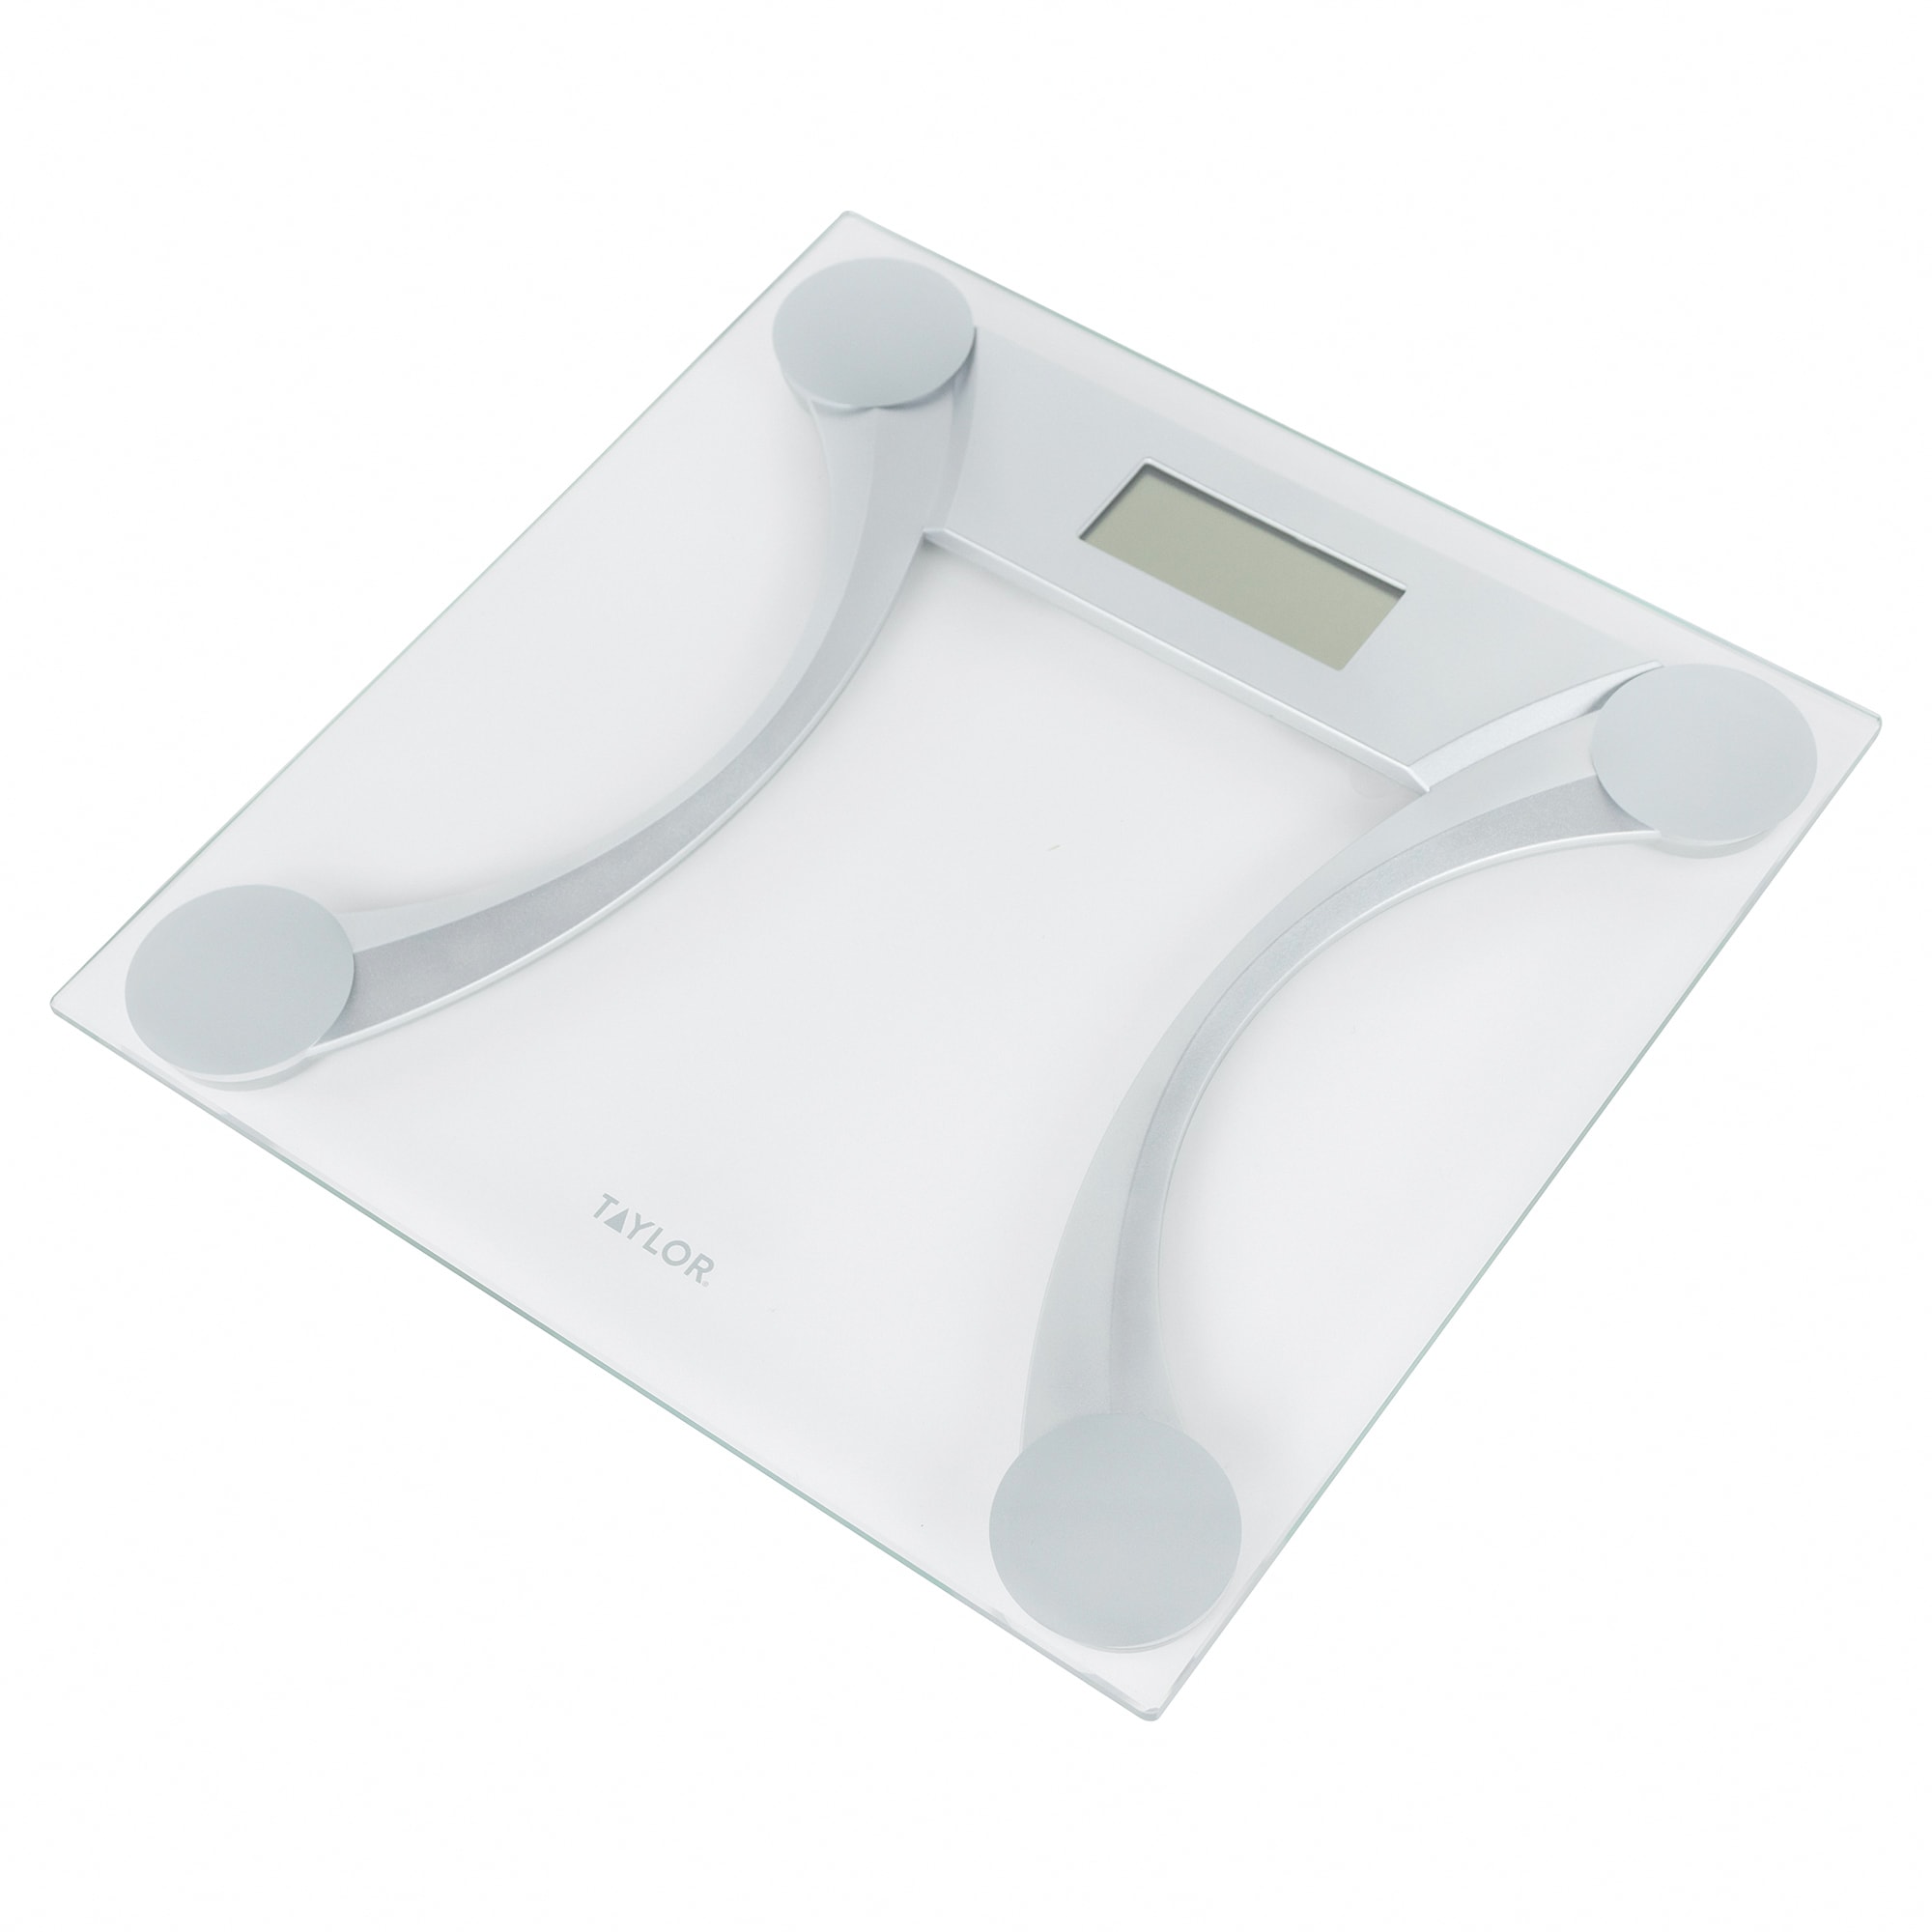  Taylor Digital Glass Bathroom Scale for Body Weight, 400 lb  Capacity, Durable Tempered Glass Platform and Easy to Read, White : Health  & Household